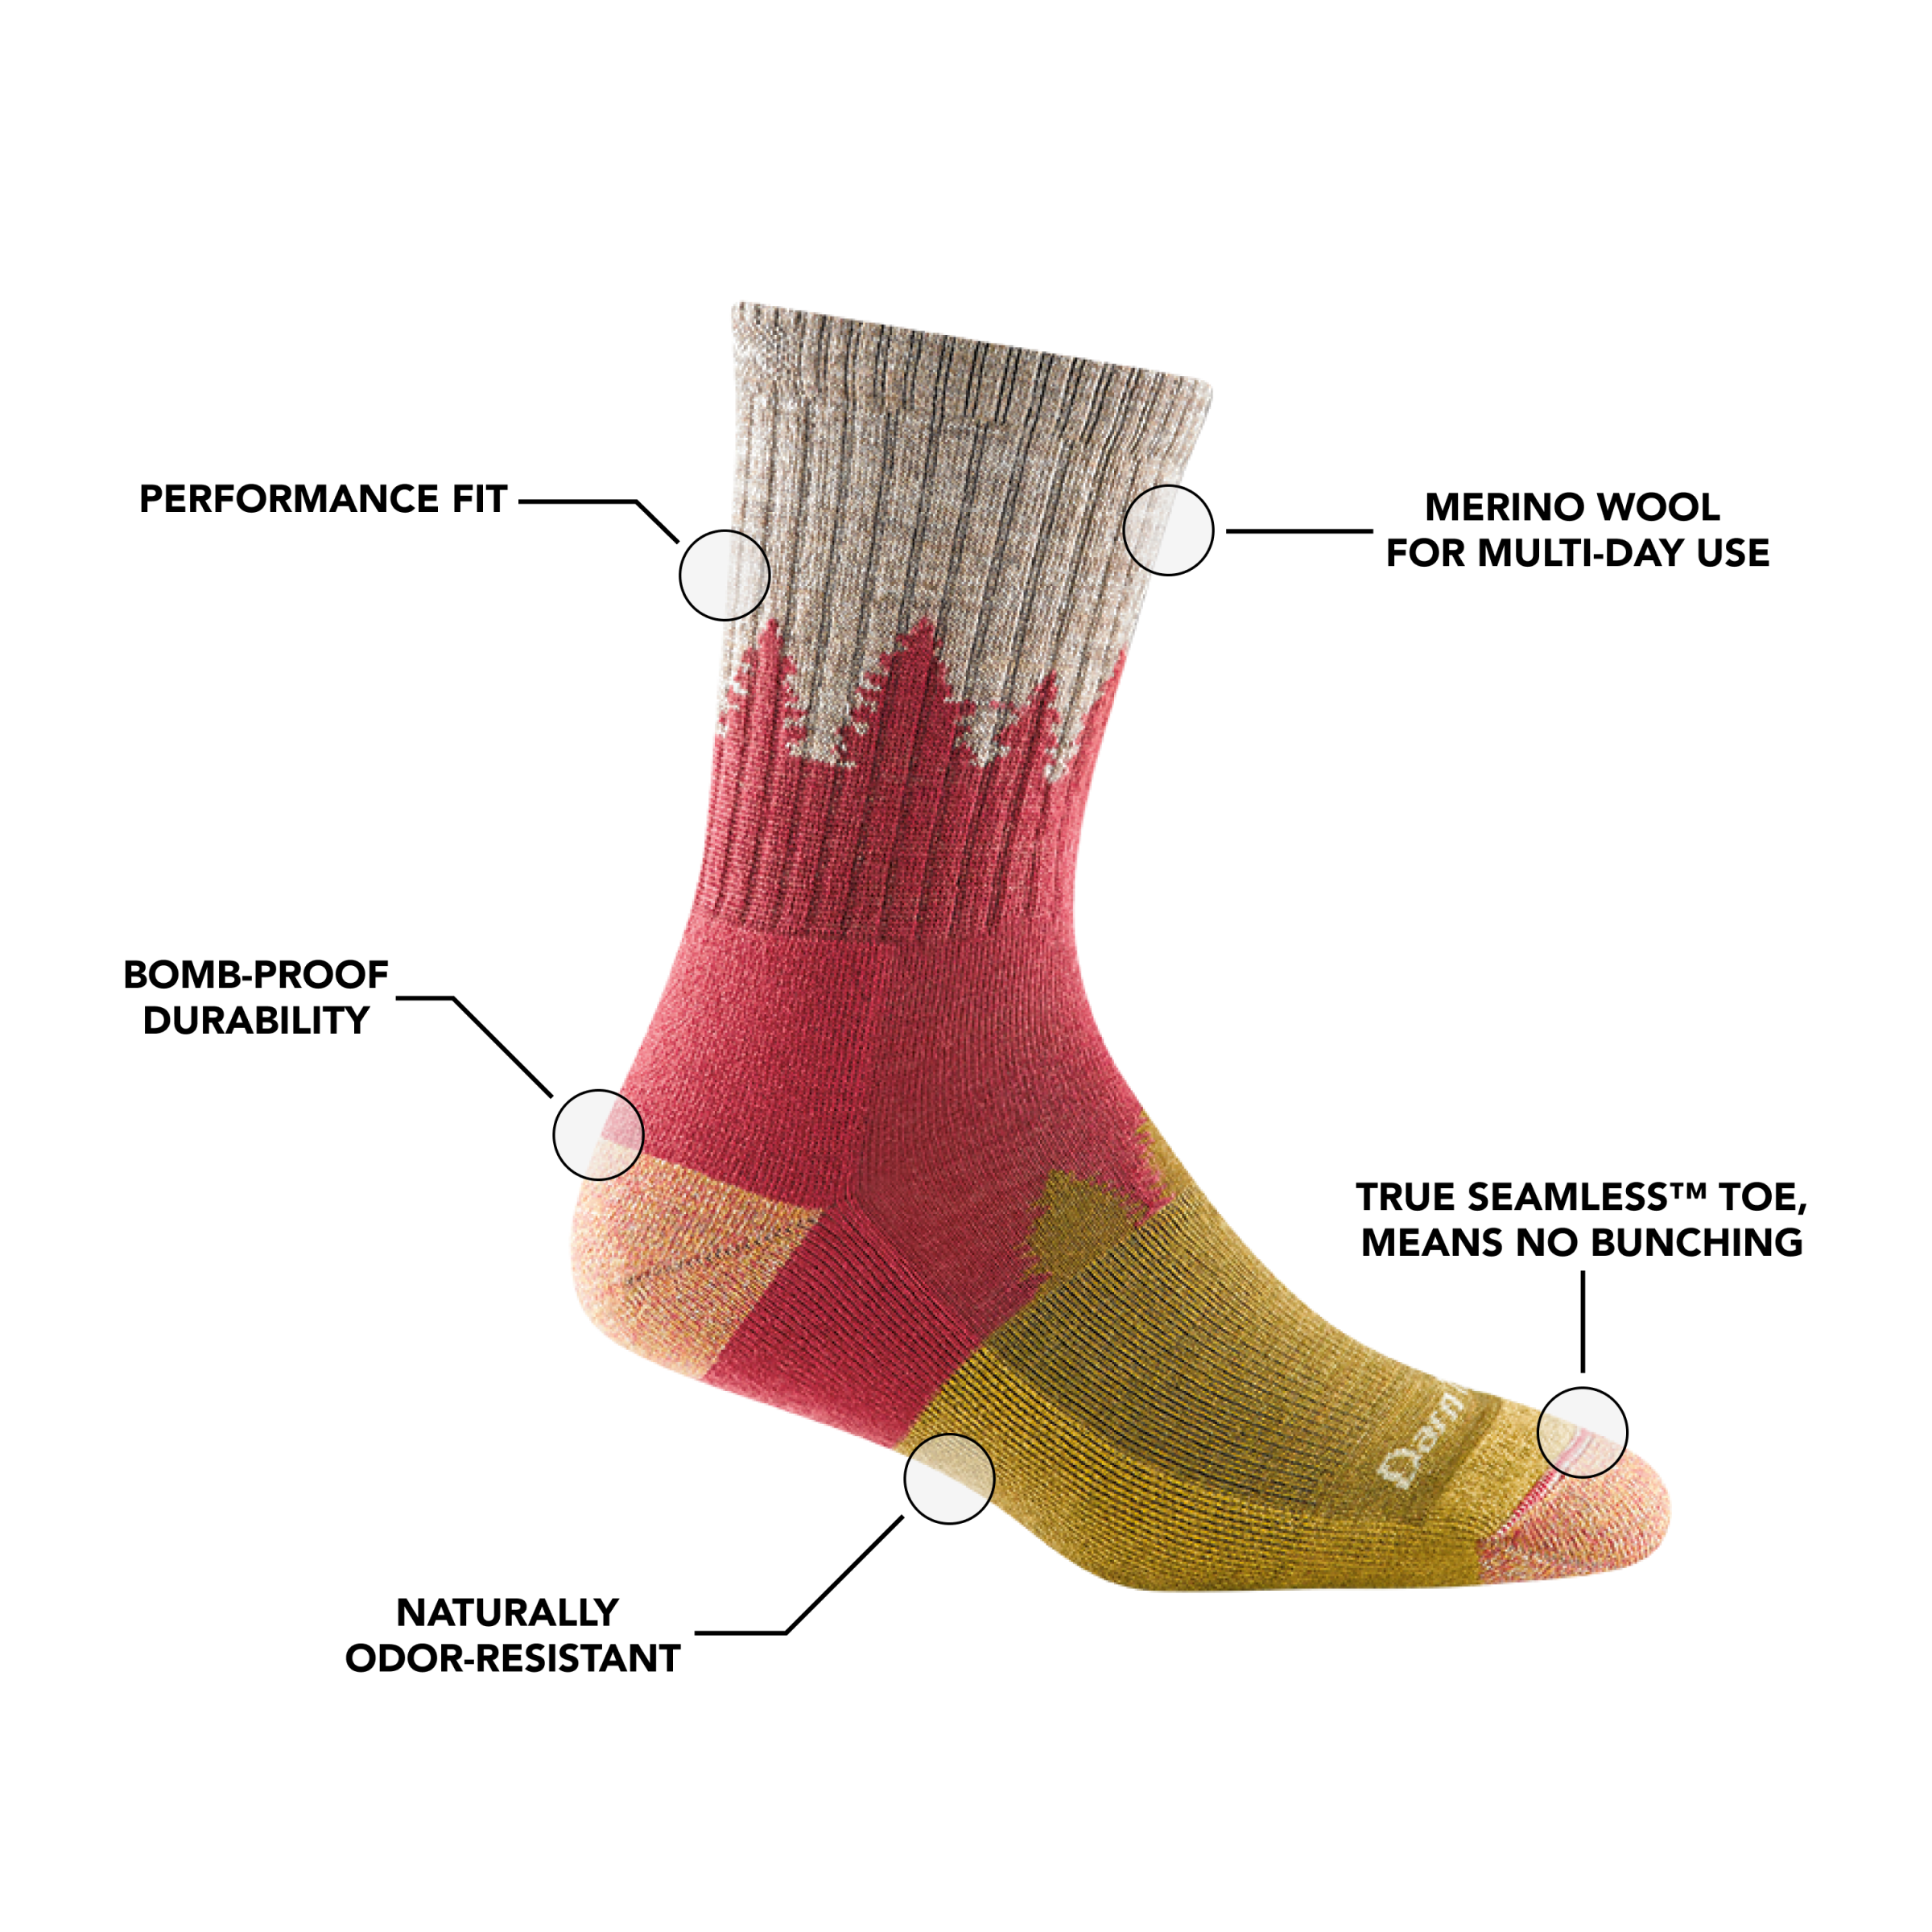 Image of Women's Treeline Micro Crew Hiking Sock in Cranberry calling out all of the features of the sock